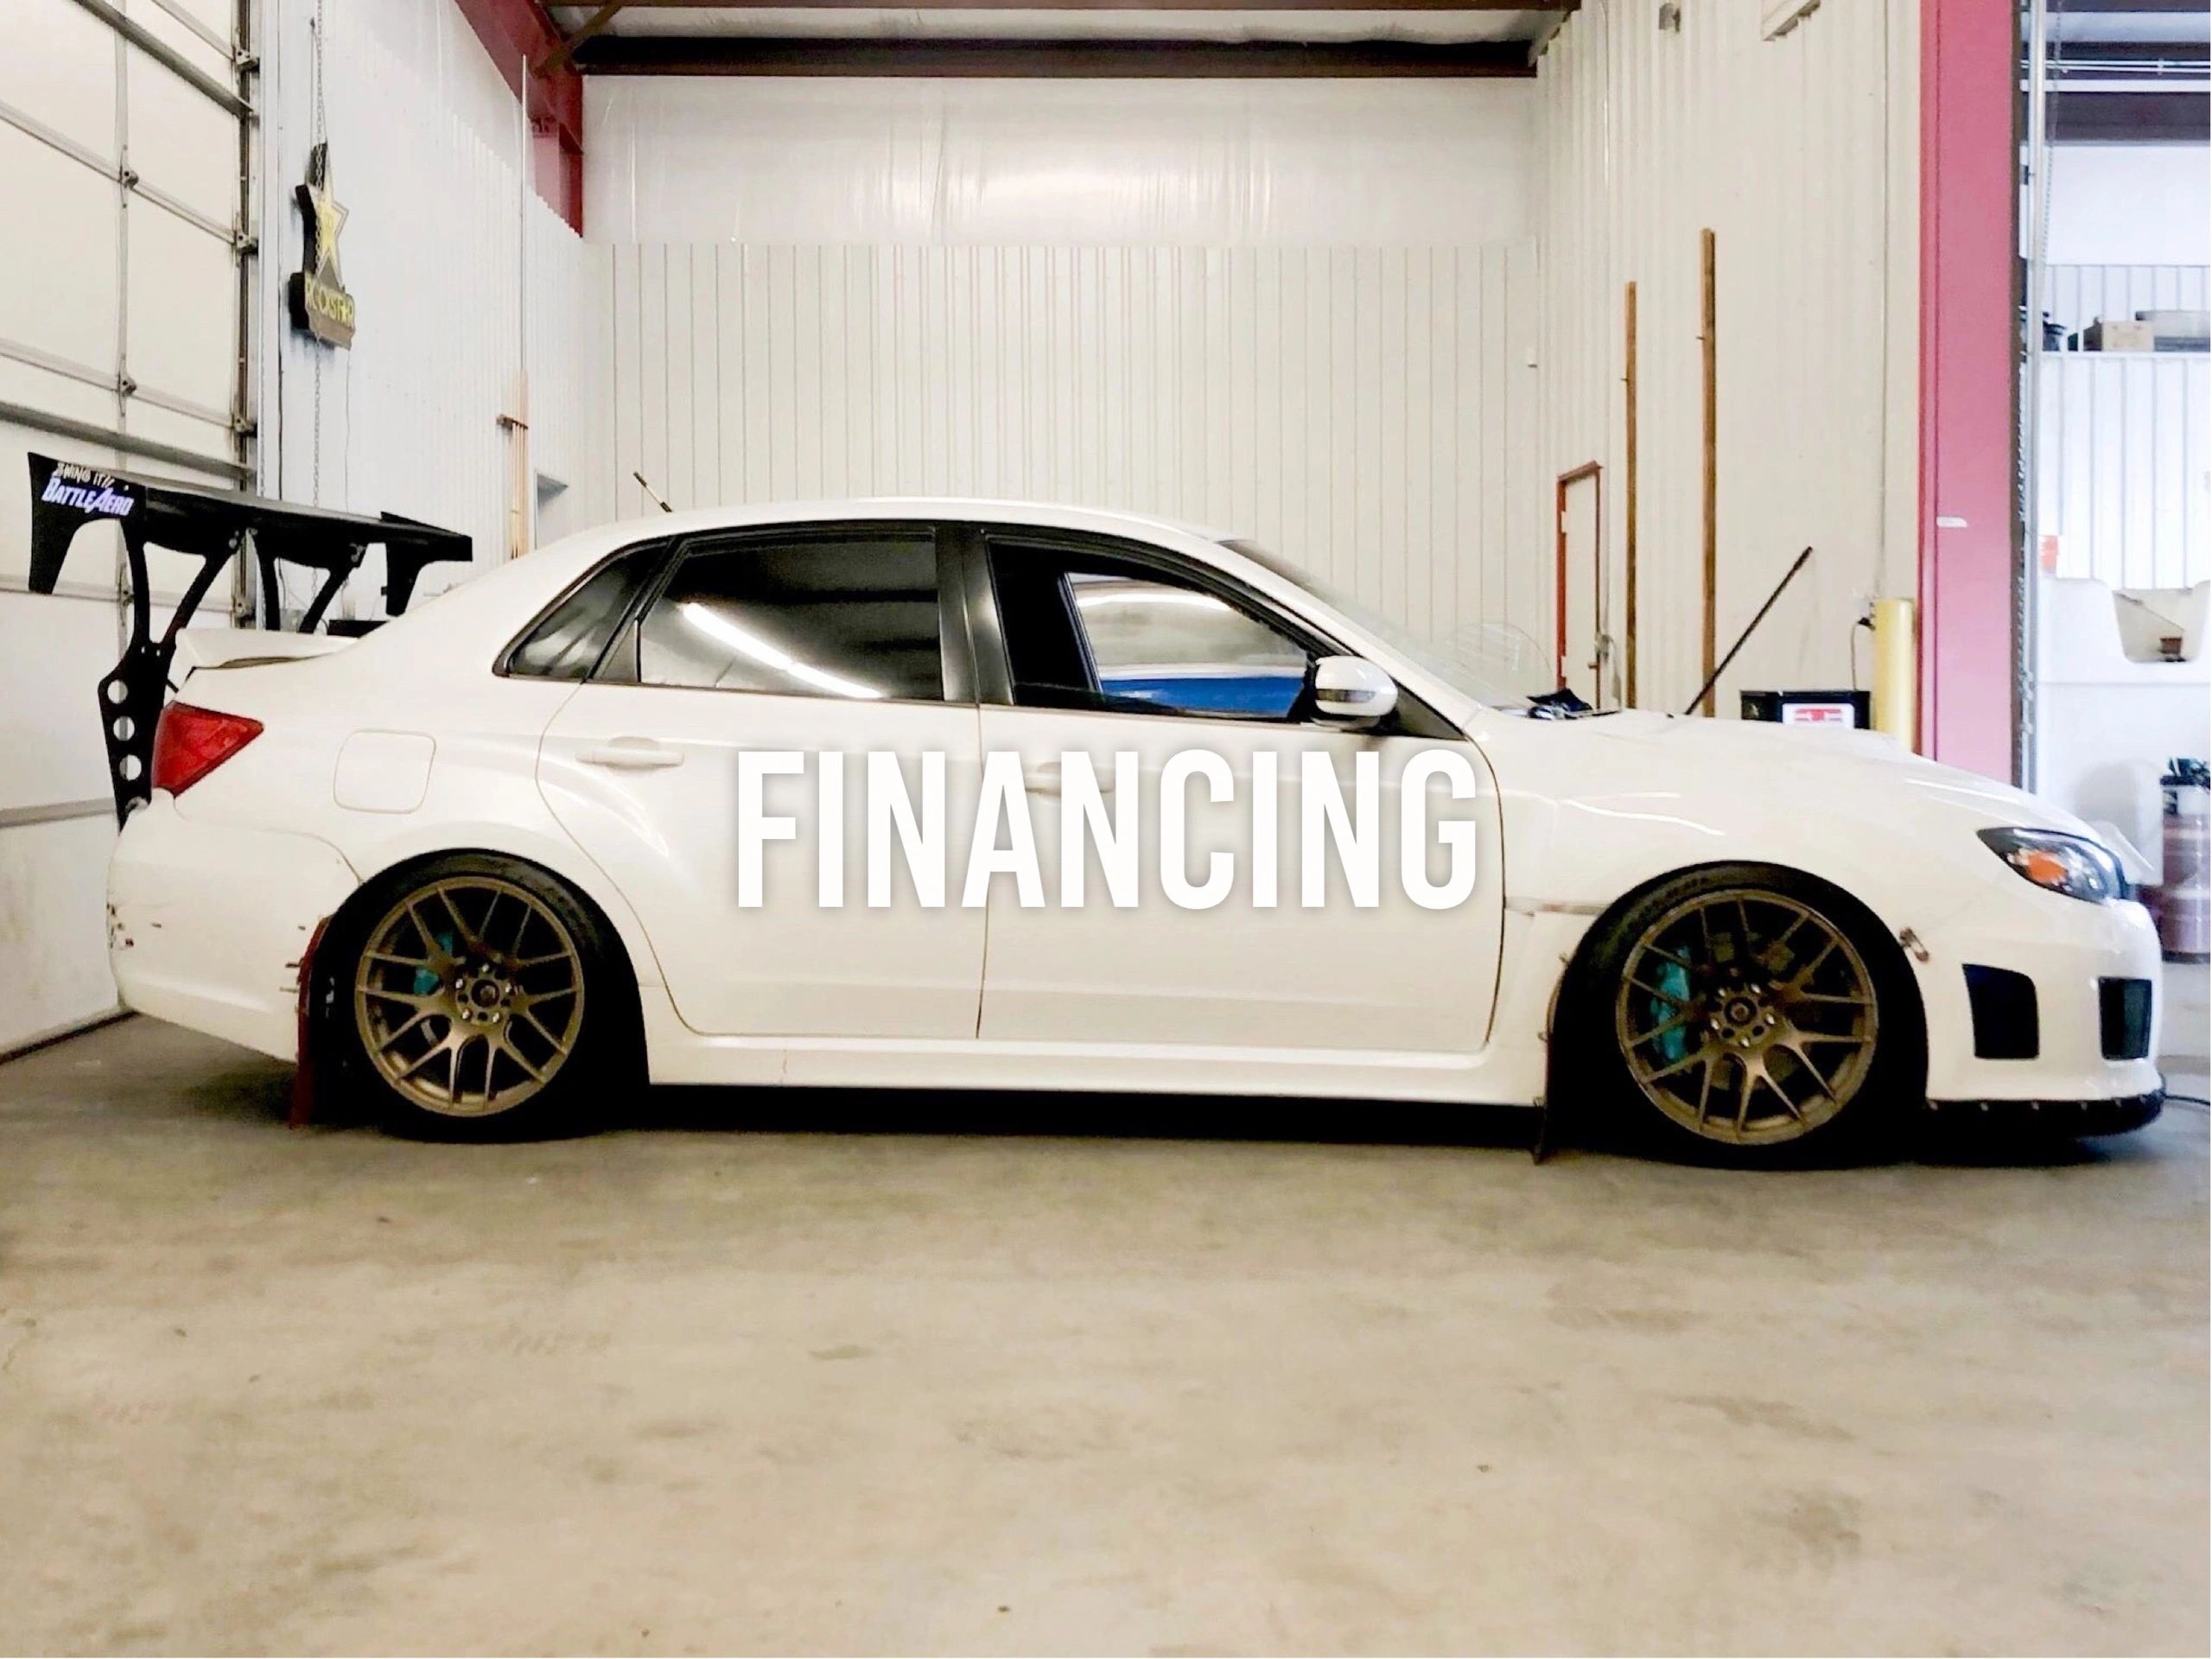 Financing Title for car wraps 